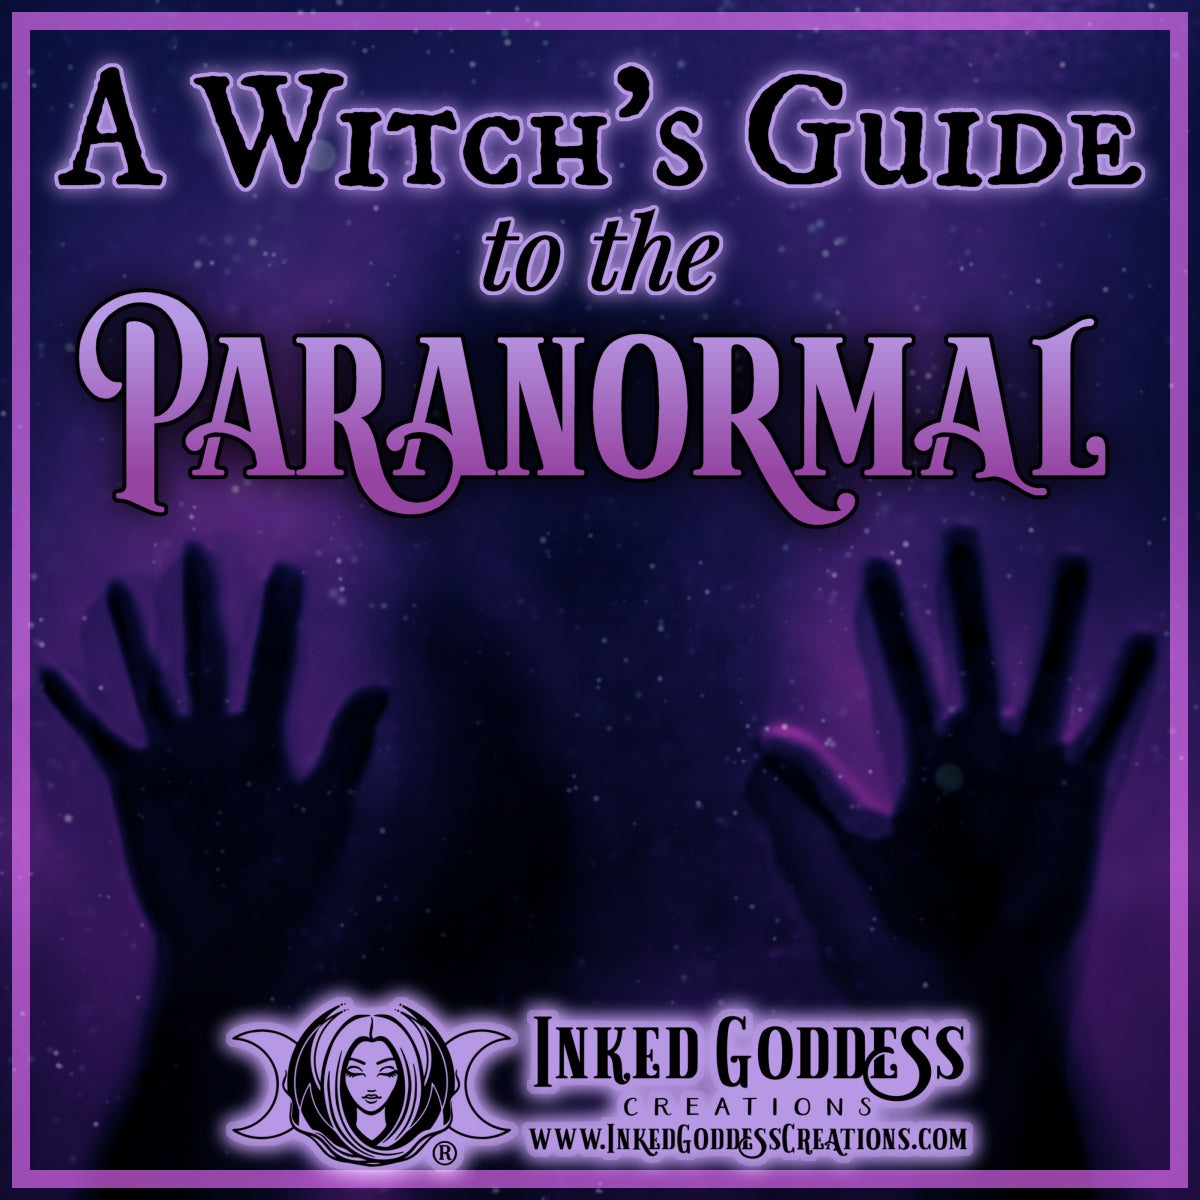 A Witch's Guide to the Paranormal